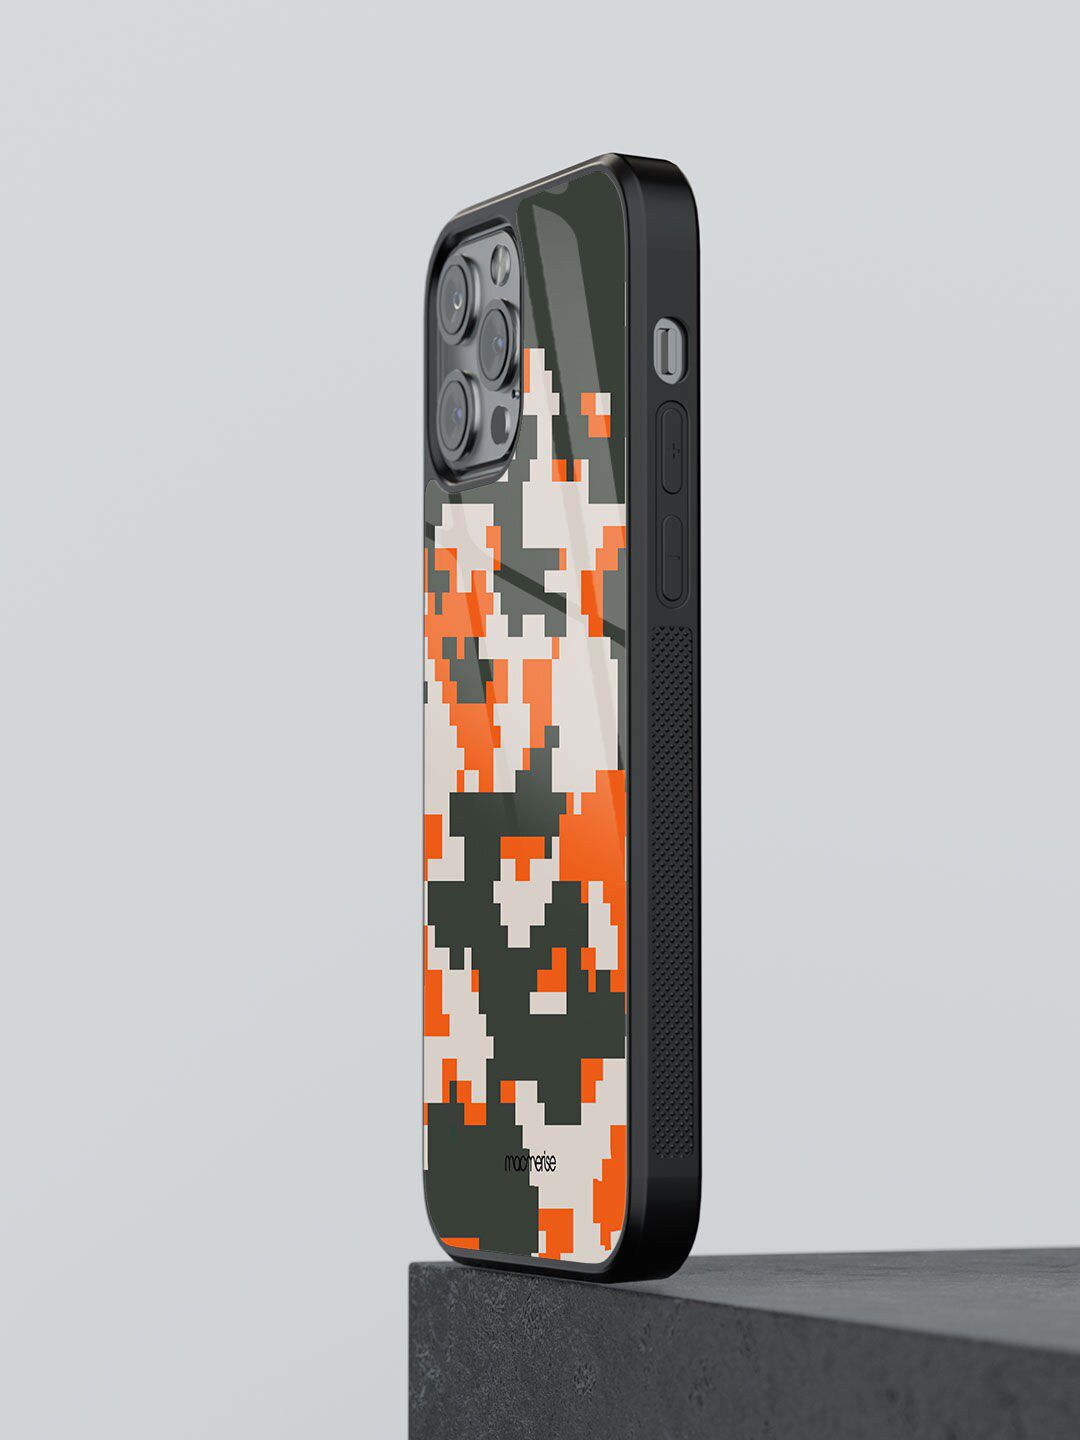 macmerise Grey & White Printed Camo Pixel Flame iPhone 12 Pro Glass Phone Back Case Price in India